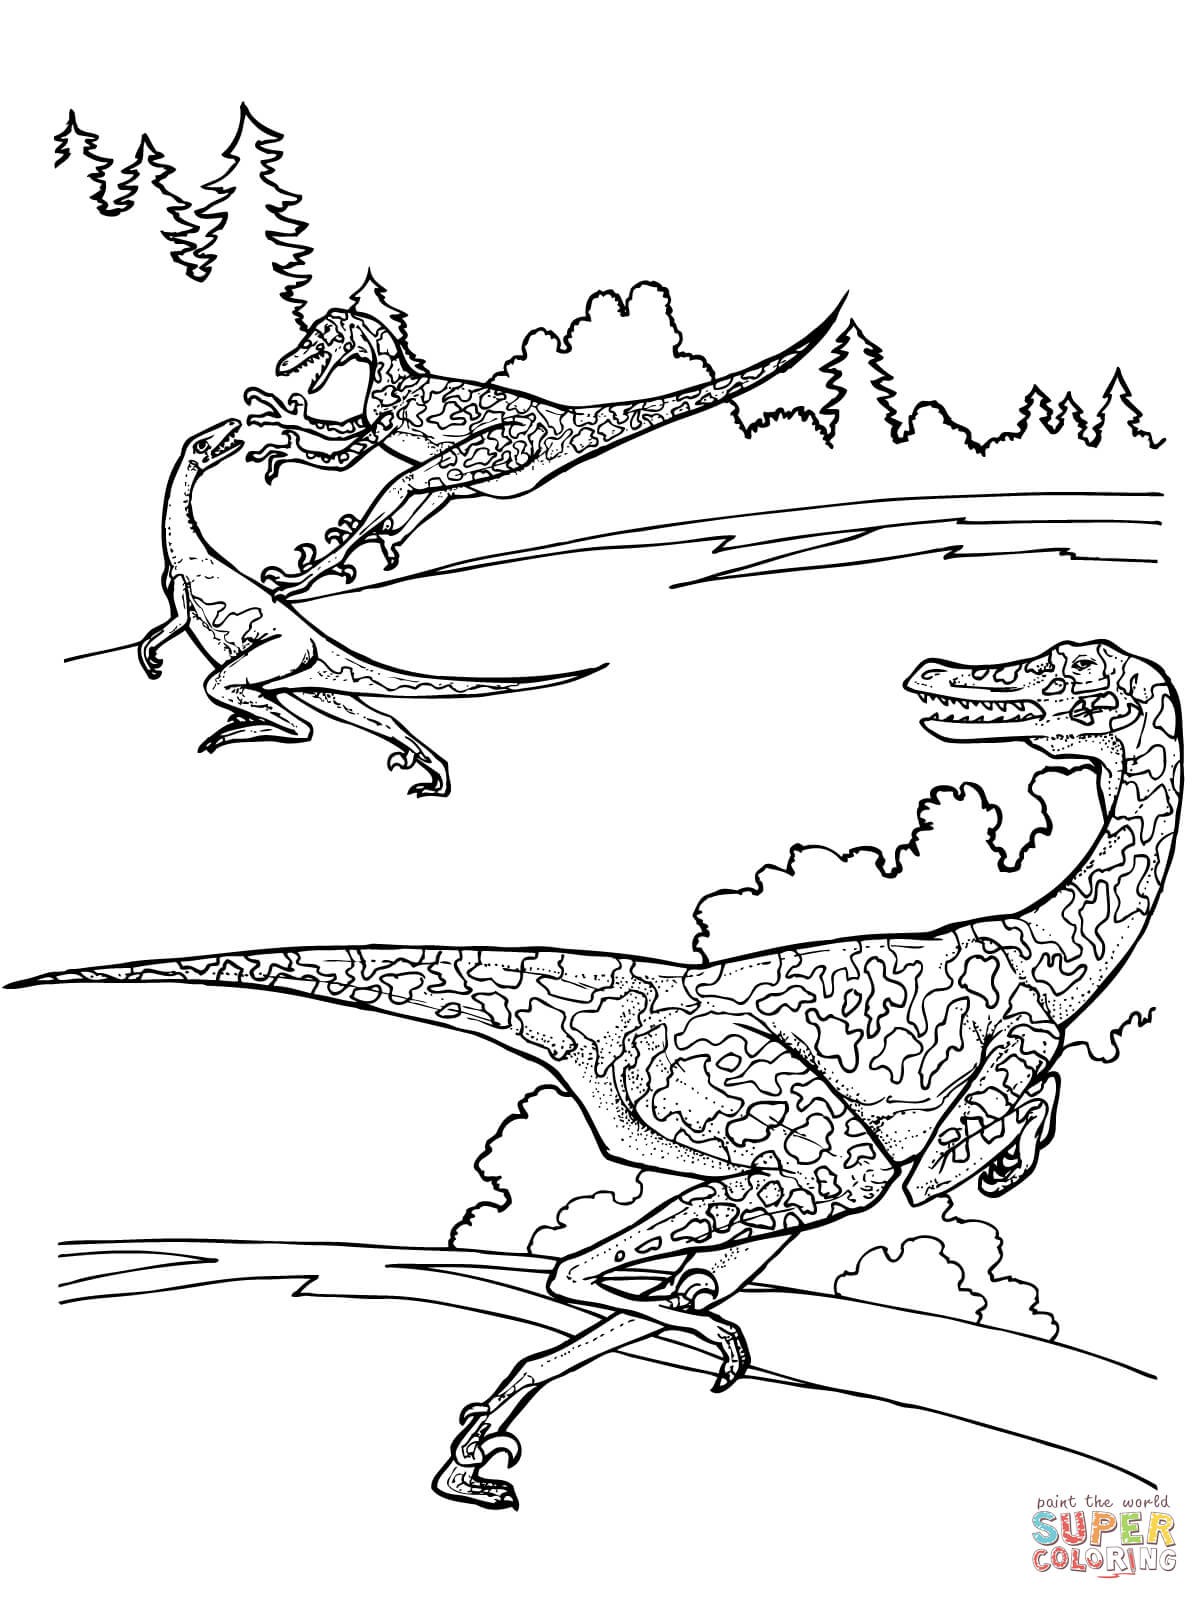 Velociraptor Dinosaur Coloring Pages Velociraptor Dinosaur Velociraptor Dinosaur